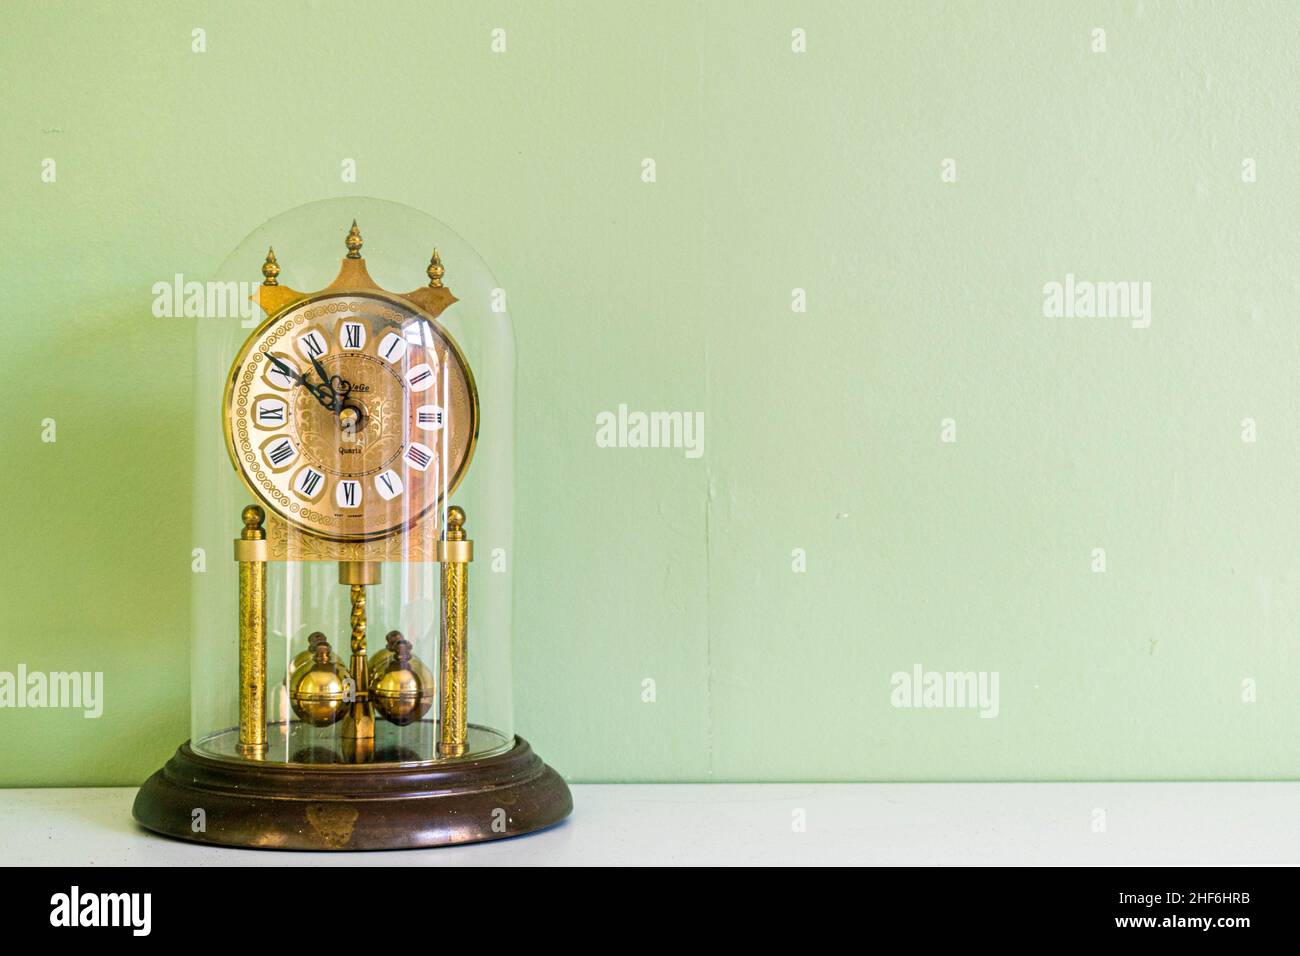 Hull, UK - 26th August 2019: Antique vintage gold bronze house clock with roman numerals and a ticking hand. Home lifestyle, home décor, lifestyle Stock Photo